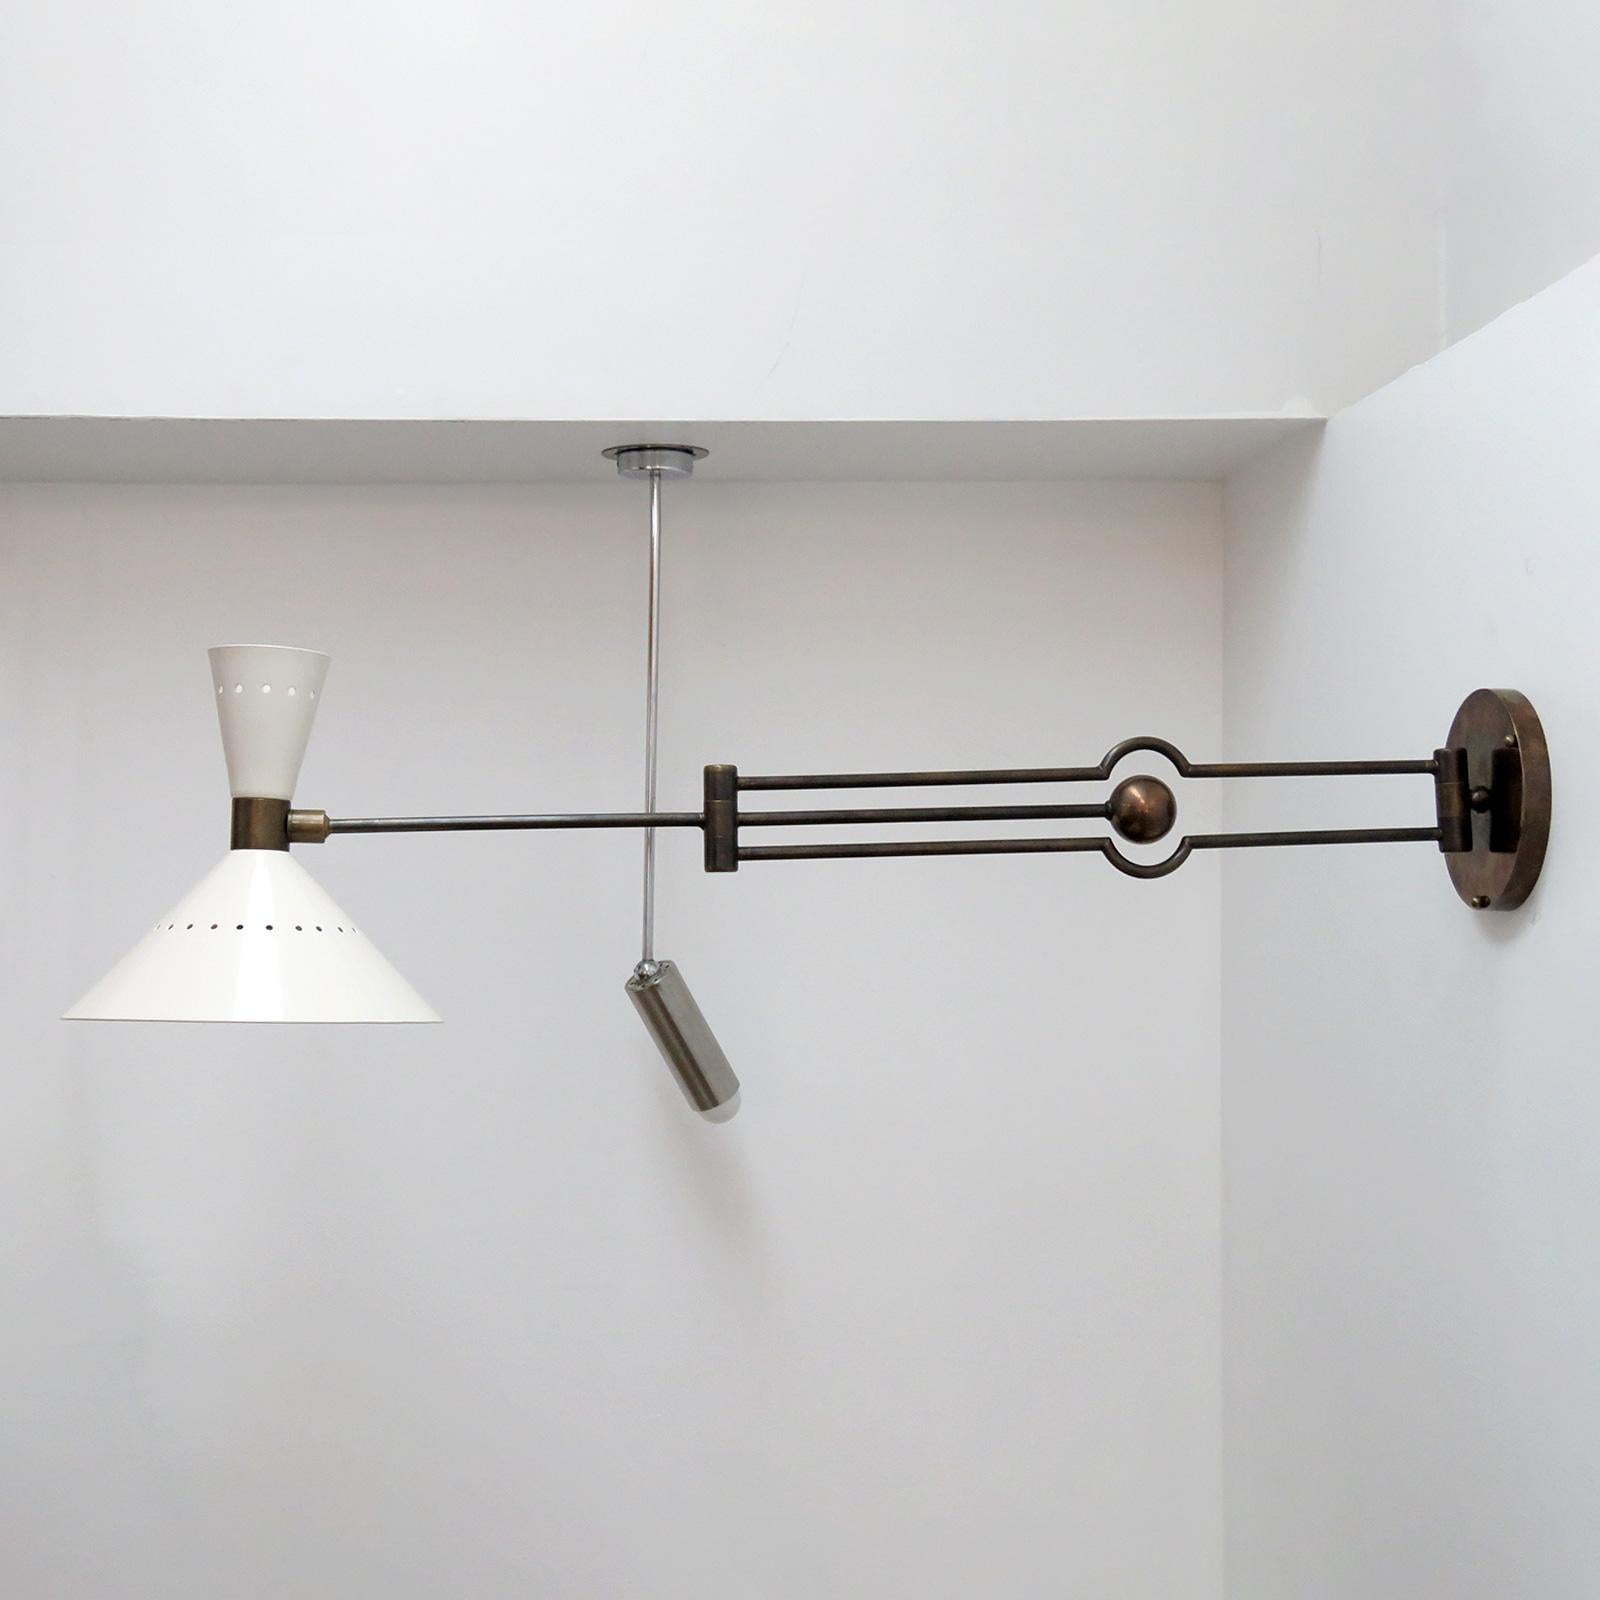 Large-scale Italian swing arm, counterbalance wall light in patinated brass, with a crème colored perforated double cone shade holding two sockets.